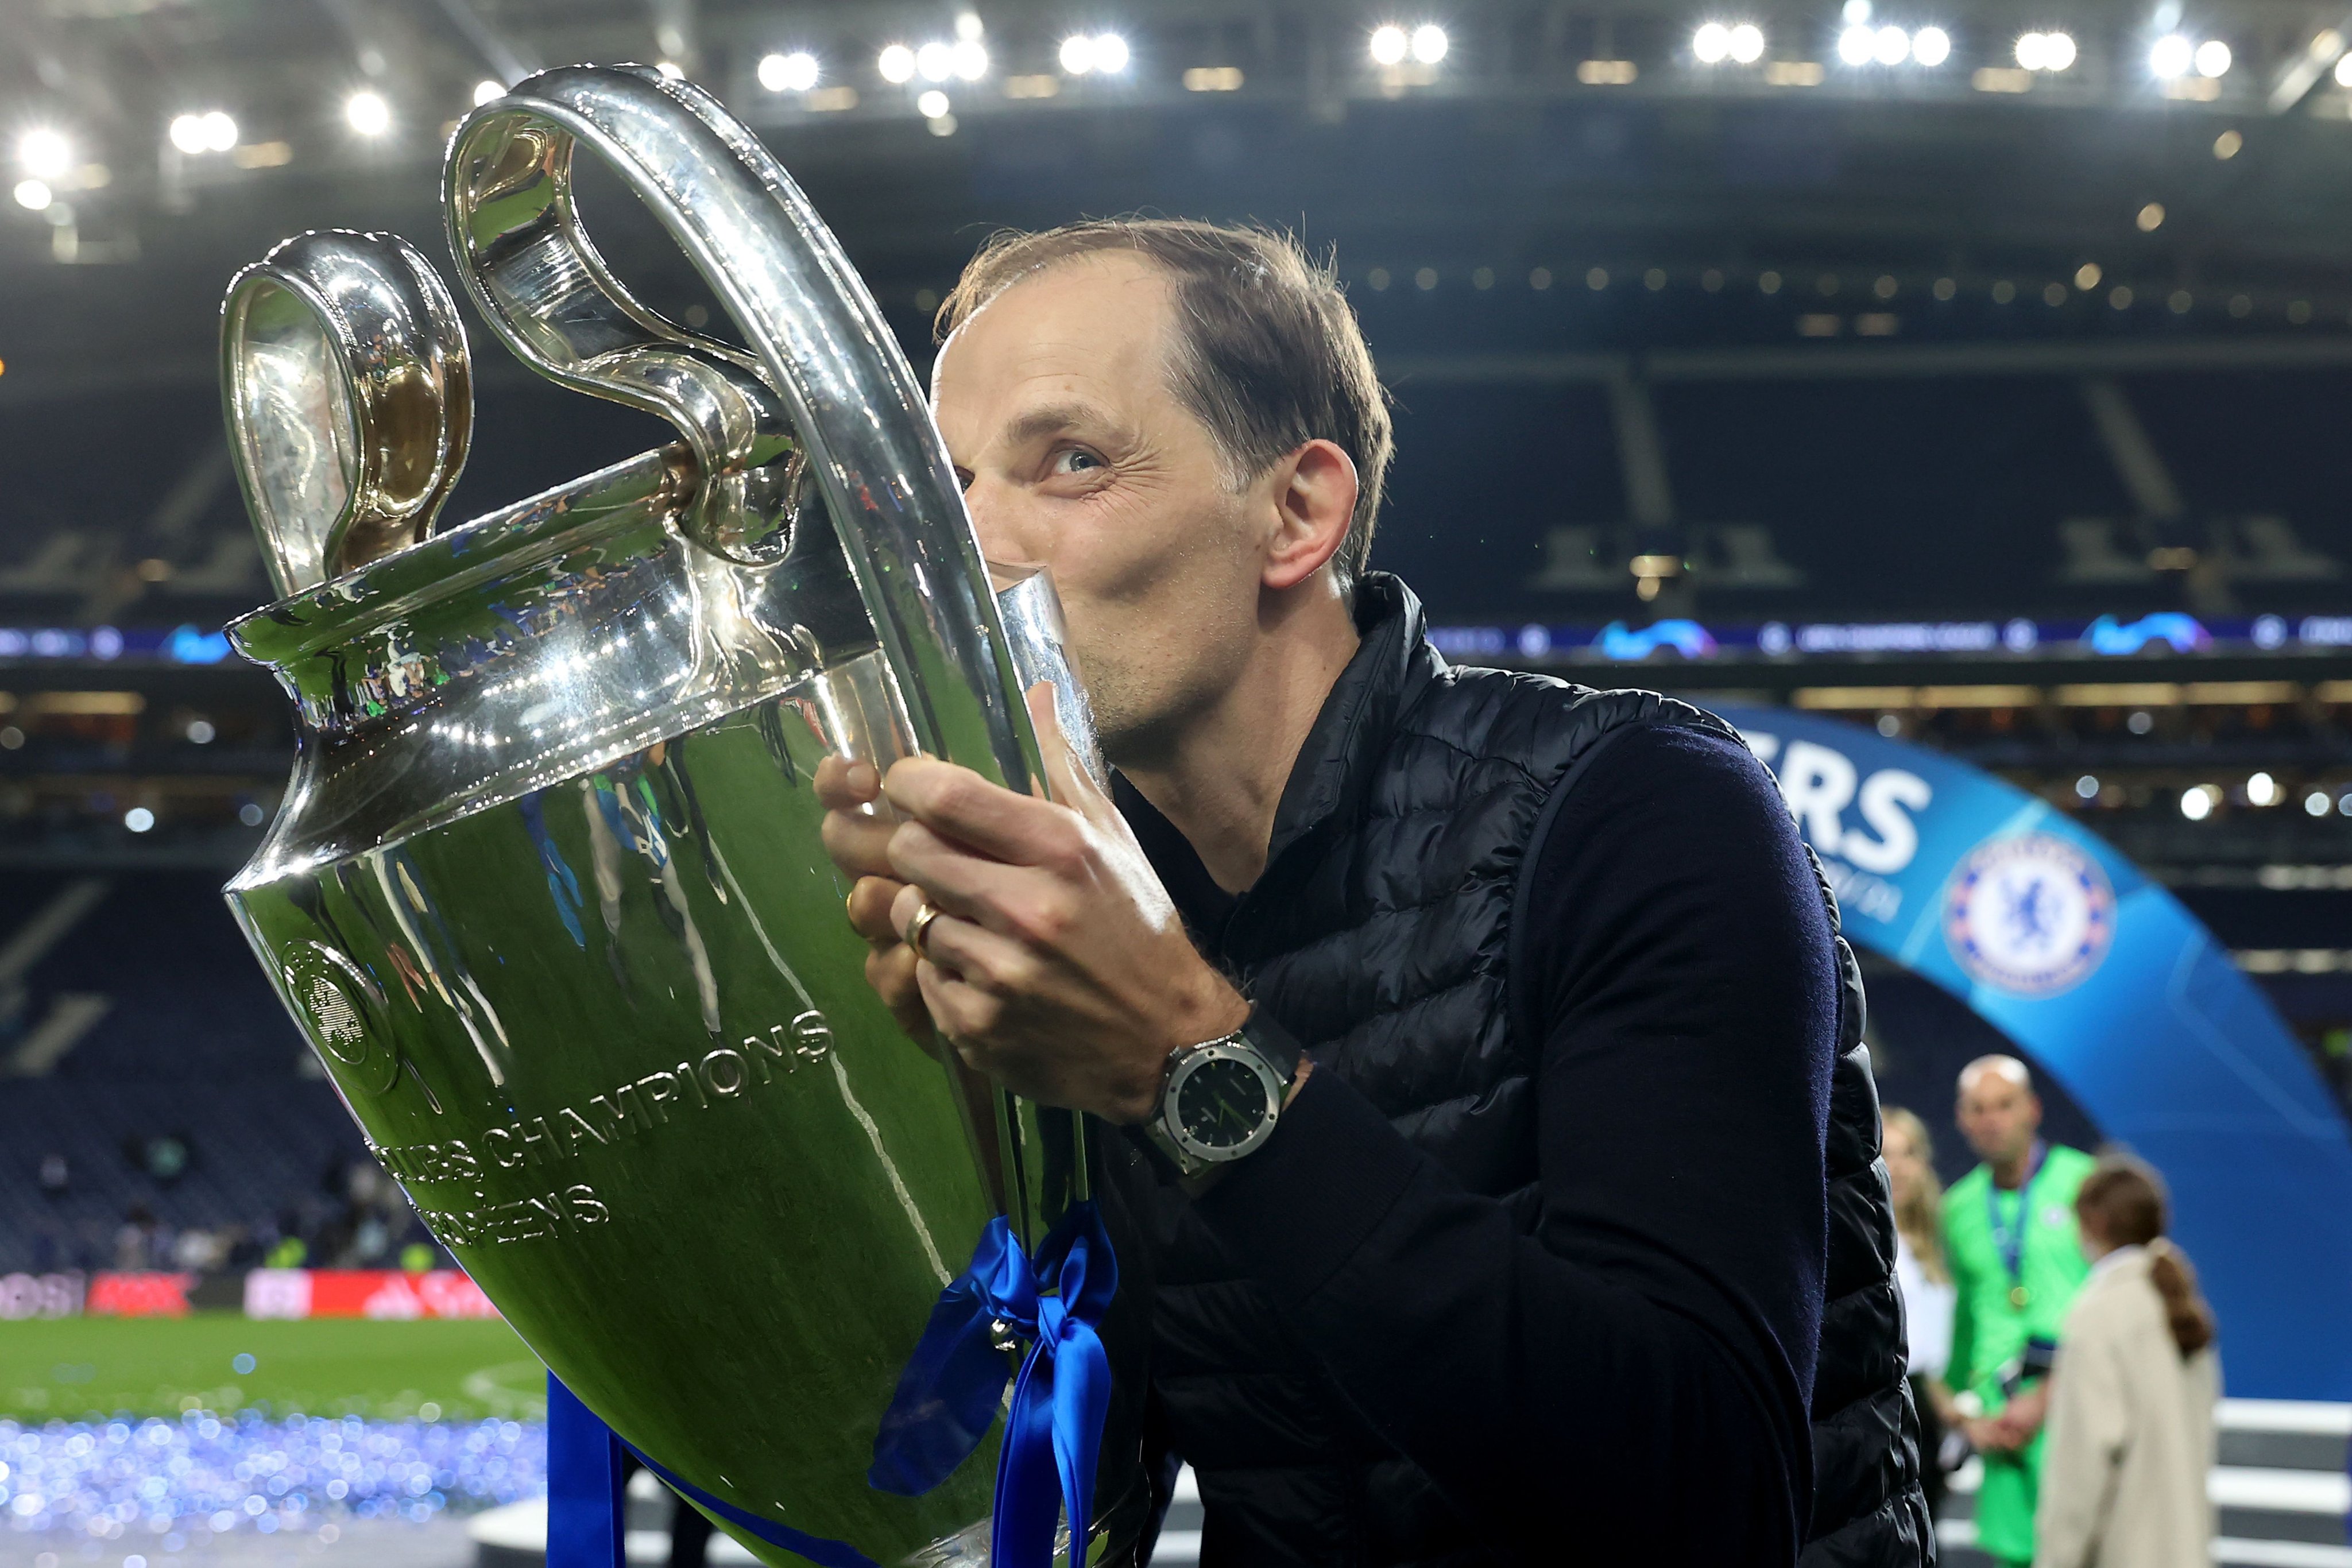 There are talks over new contract but I think it’s best if I focus on my team, claims Thomas Tuchel